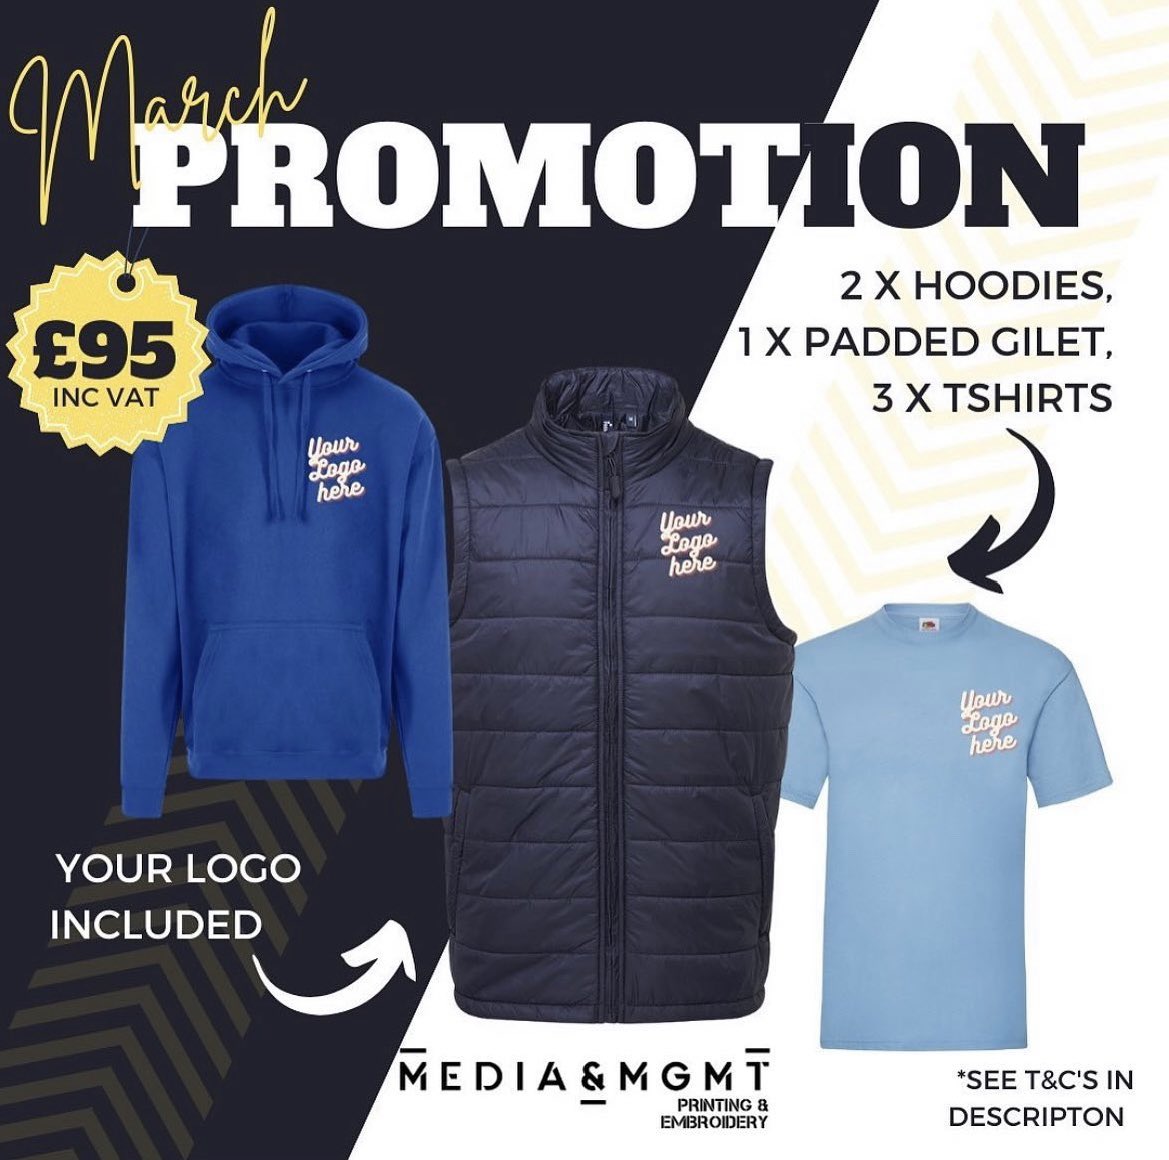 March Bundle offer .. 

1 x Padded Gilet 
2 x Hoodies 
3 x T-shirt’s 
Your choice of colour. 

£95 including VAT. 

#printingexperts #march #promotion #offer 
#printing #doncasterisgreat #uniform #customprints #doncasterbusiness #logoprinting #printingsolution